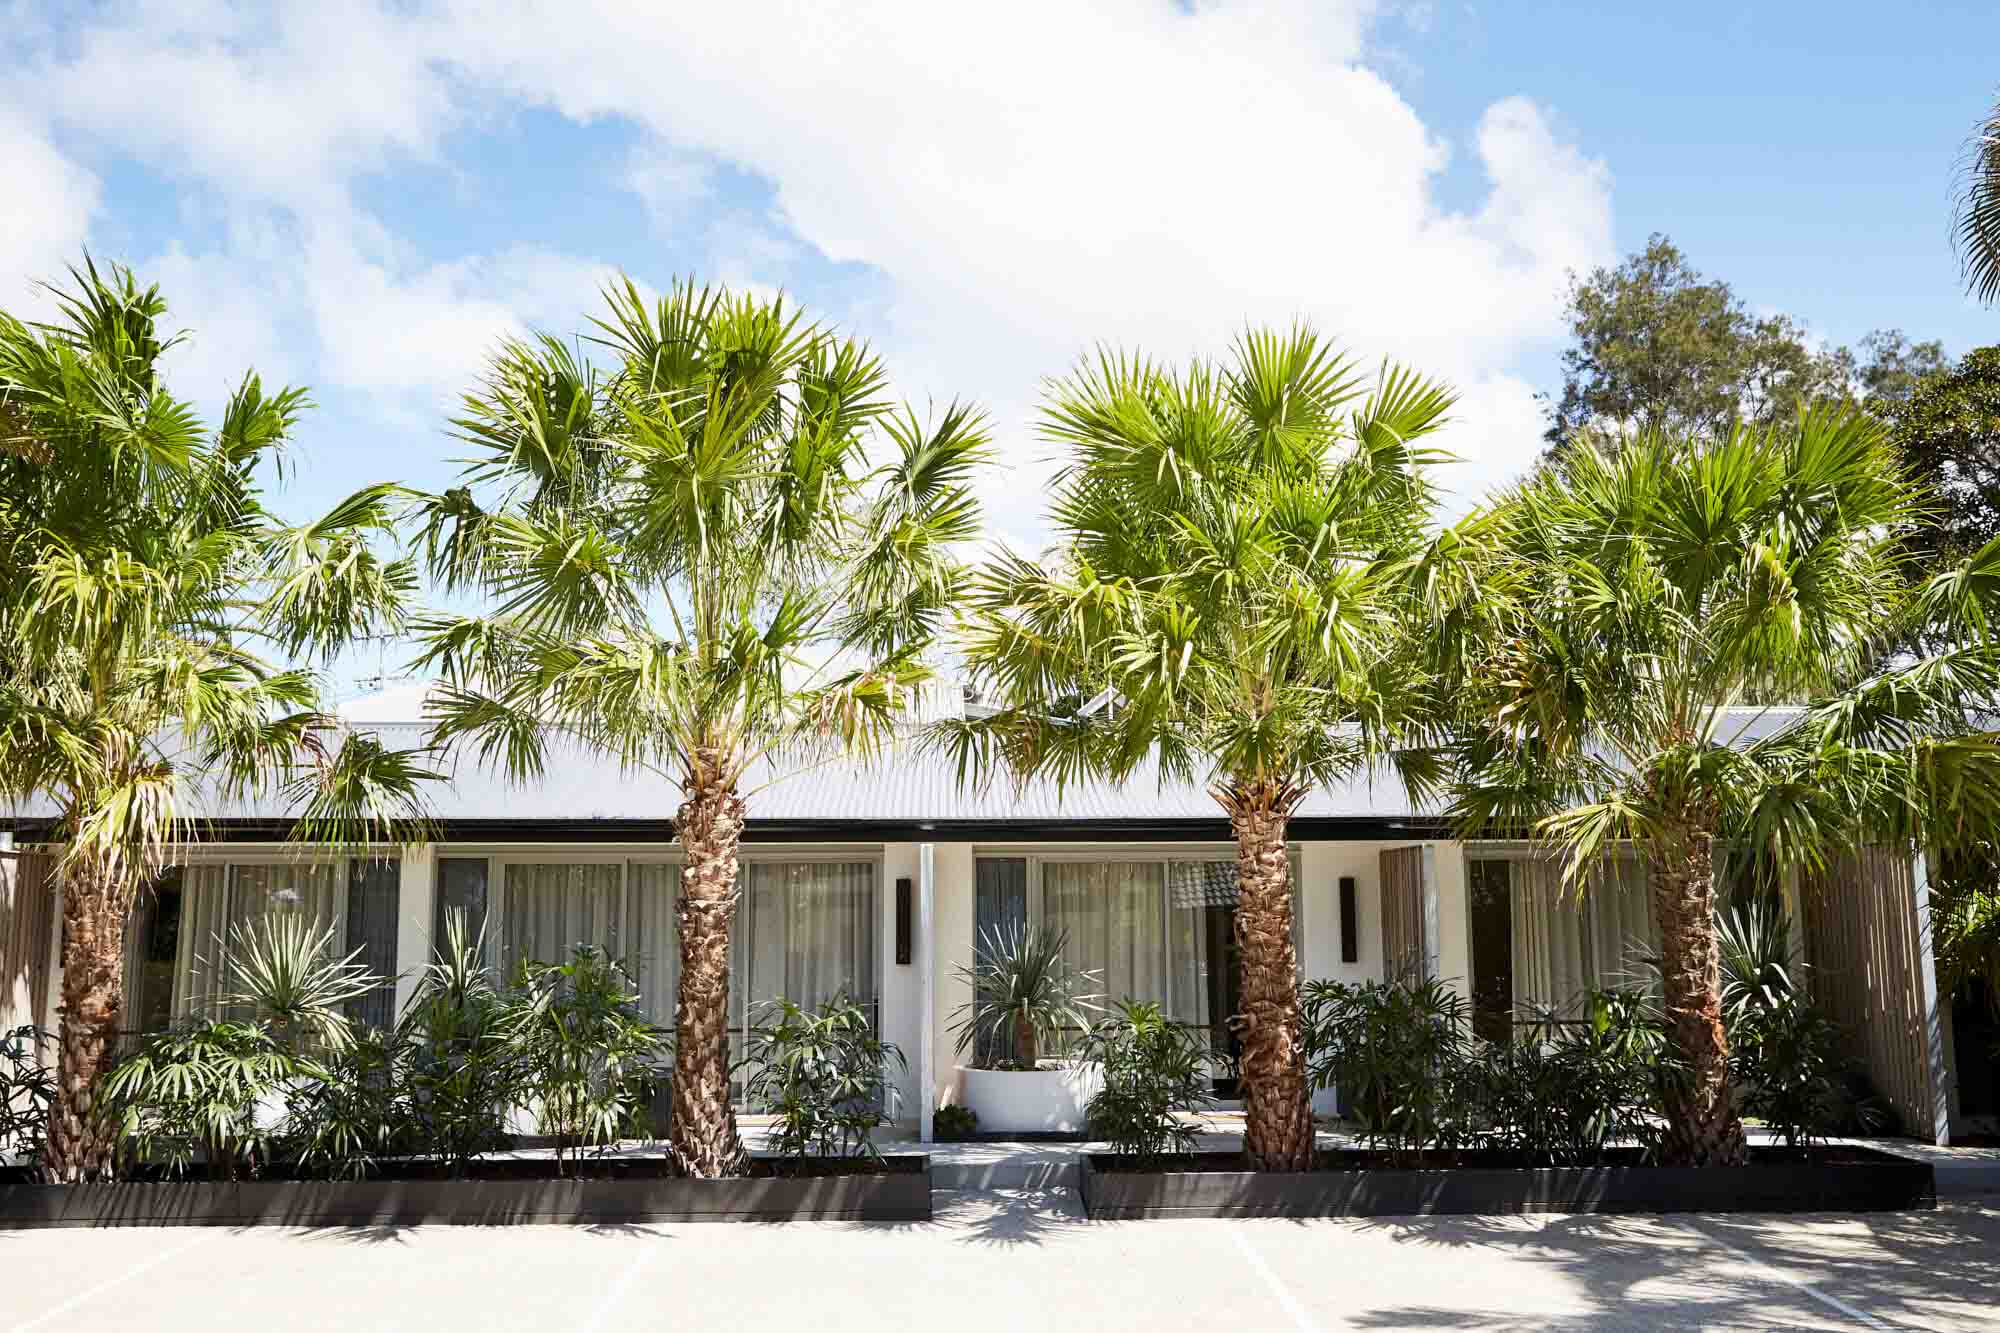 Tall palm trees lining the entrance to the Bower Suites at The Bower Byron Bay boutique hotel